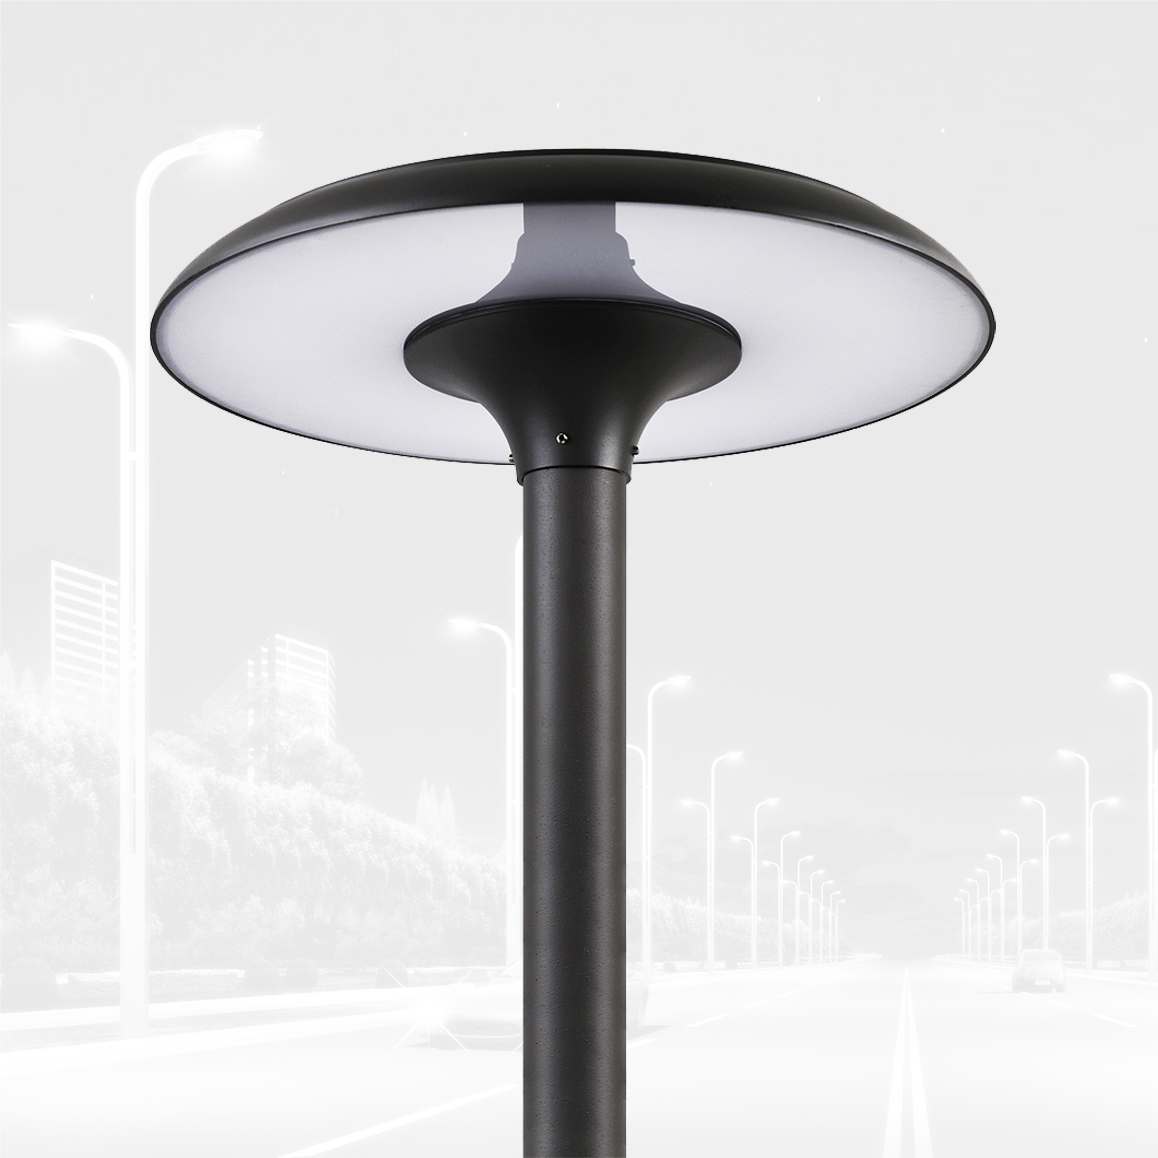 YMLED-6132 mushroom shape 30w led parking light with high quality made in china